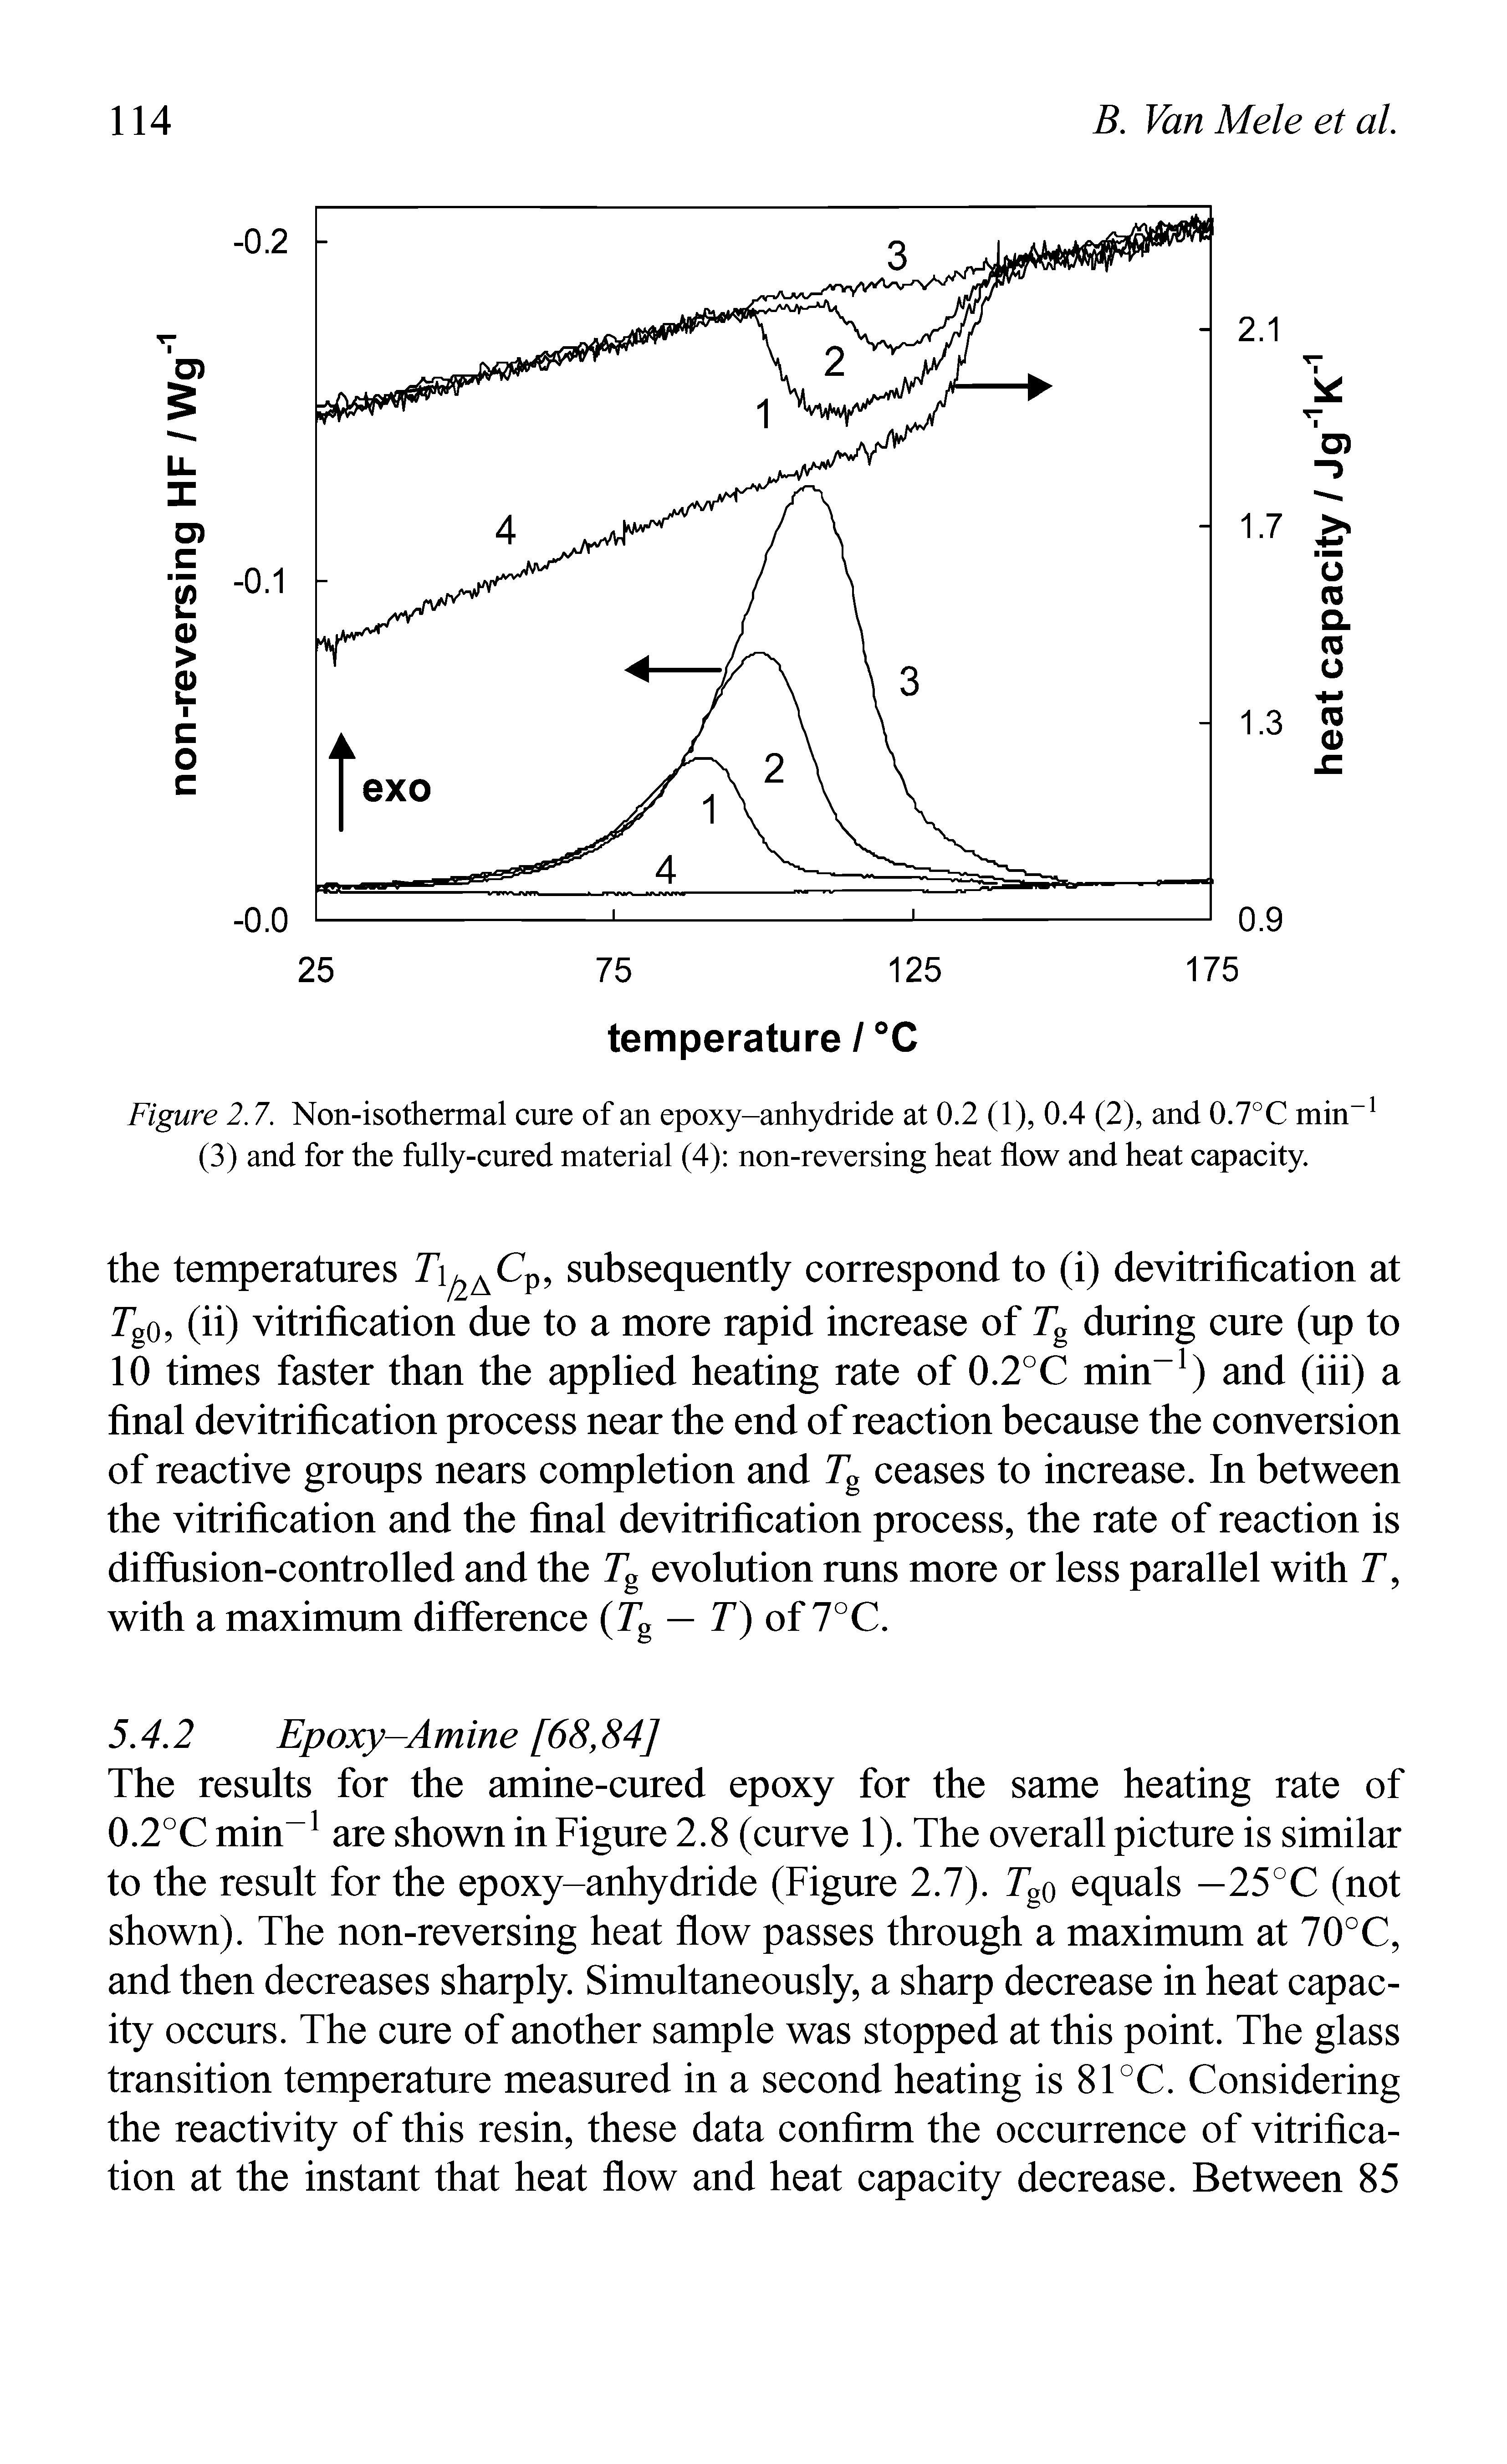 Figure 2.7. Non-isothermal cure of an epoxy-anhydride at 0.2 (1), 0.4 (2), and 0.7°C min (3) and for the fully-cured material (4) non-reversing heat flow and heat capacity.